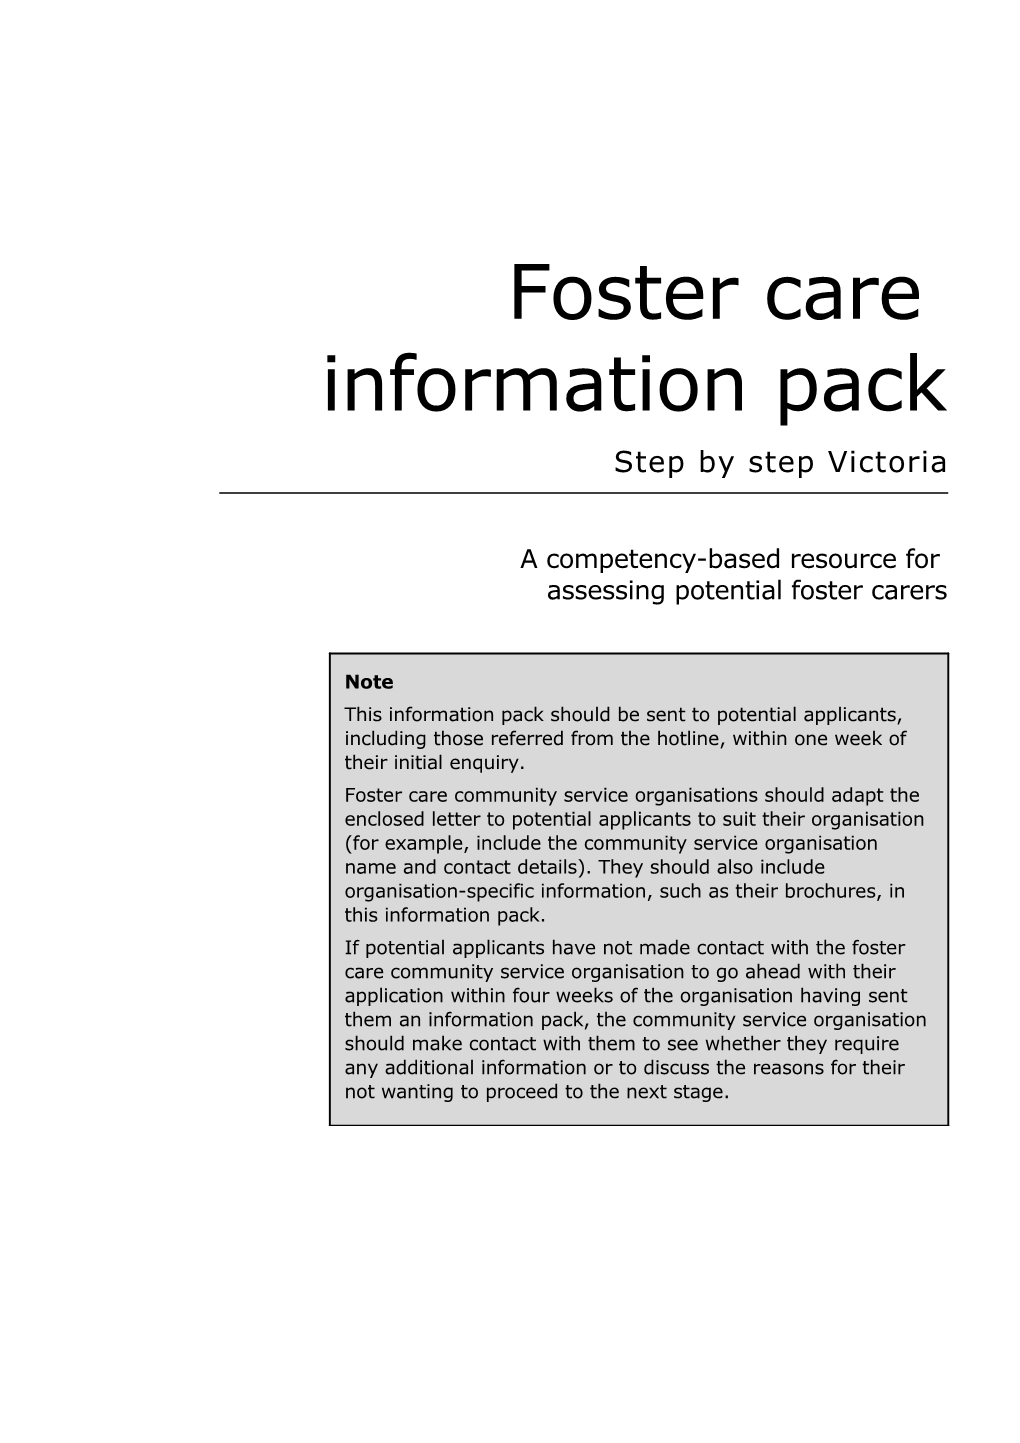 Step by Step Victoria Foster Care Information Pack